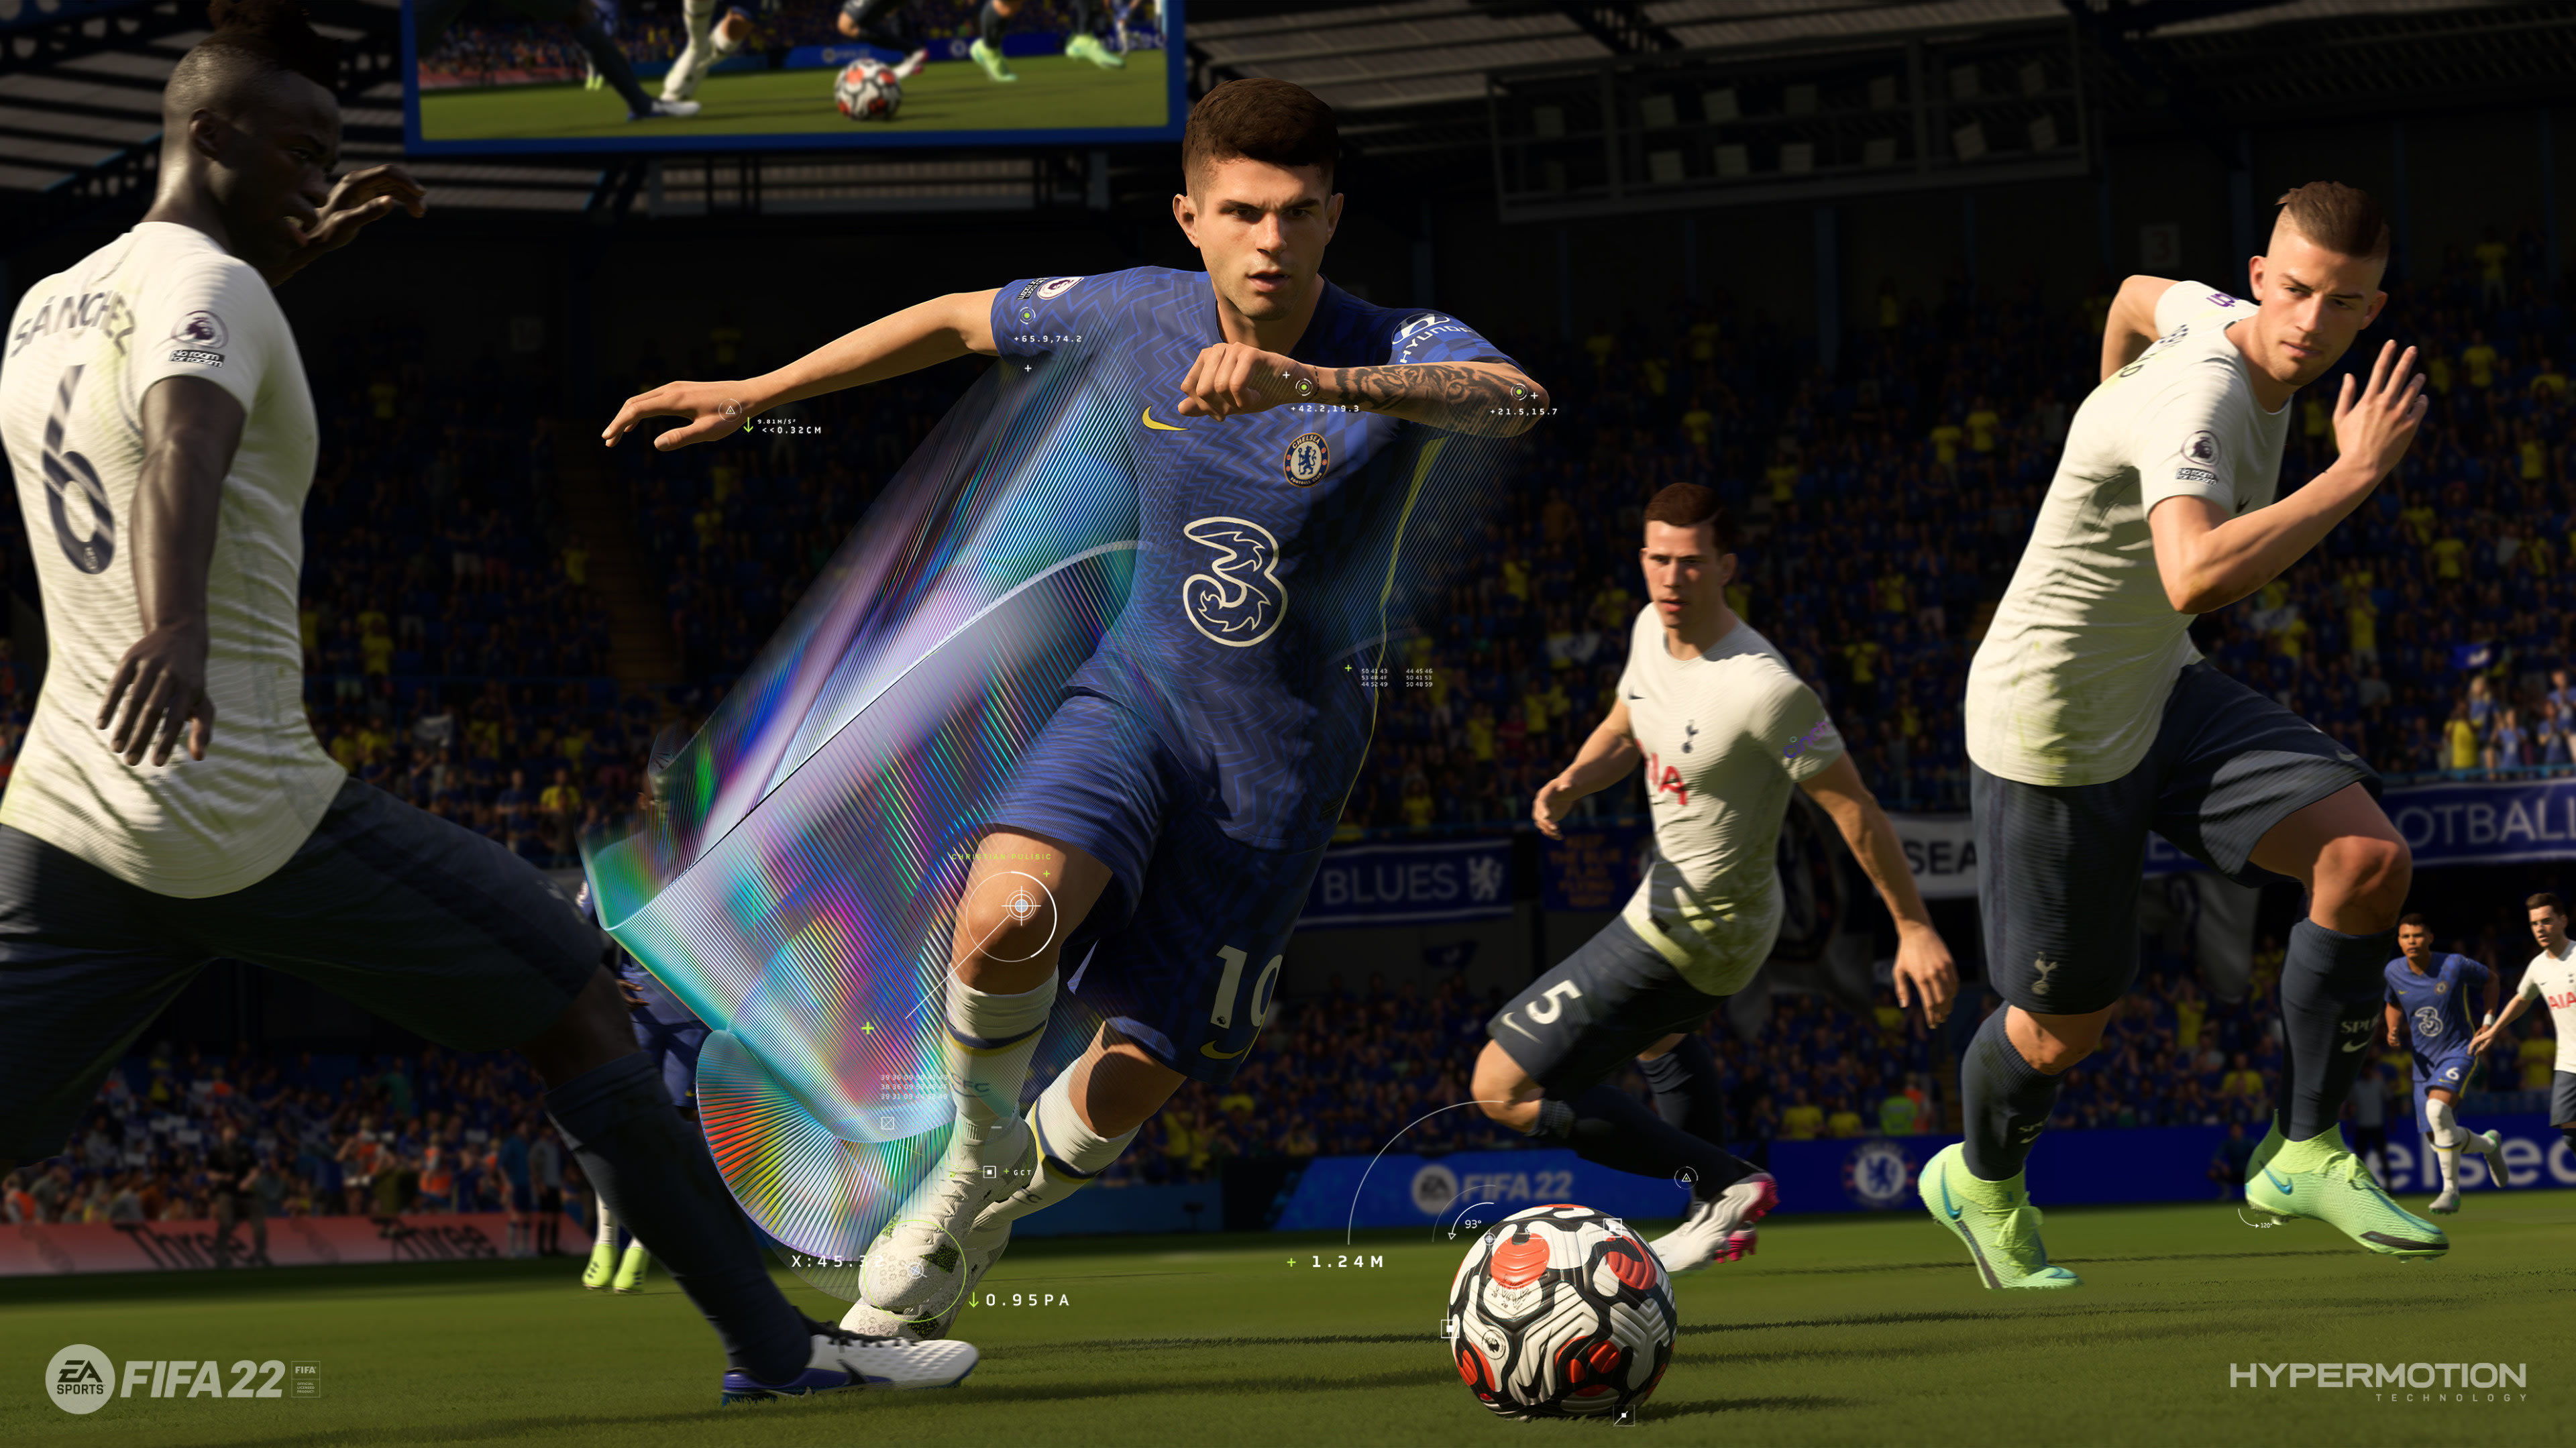 video game, fifa 22